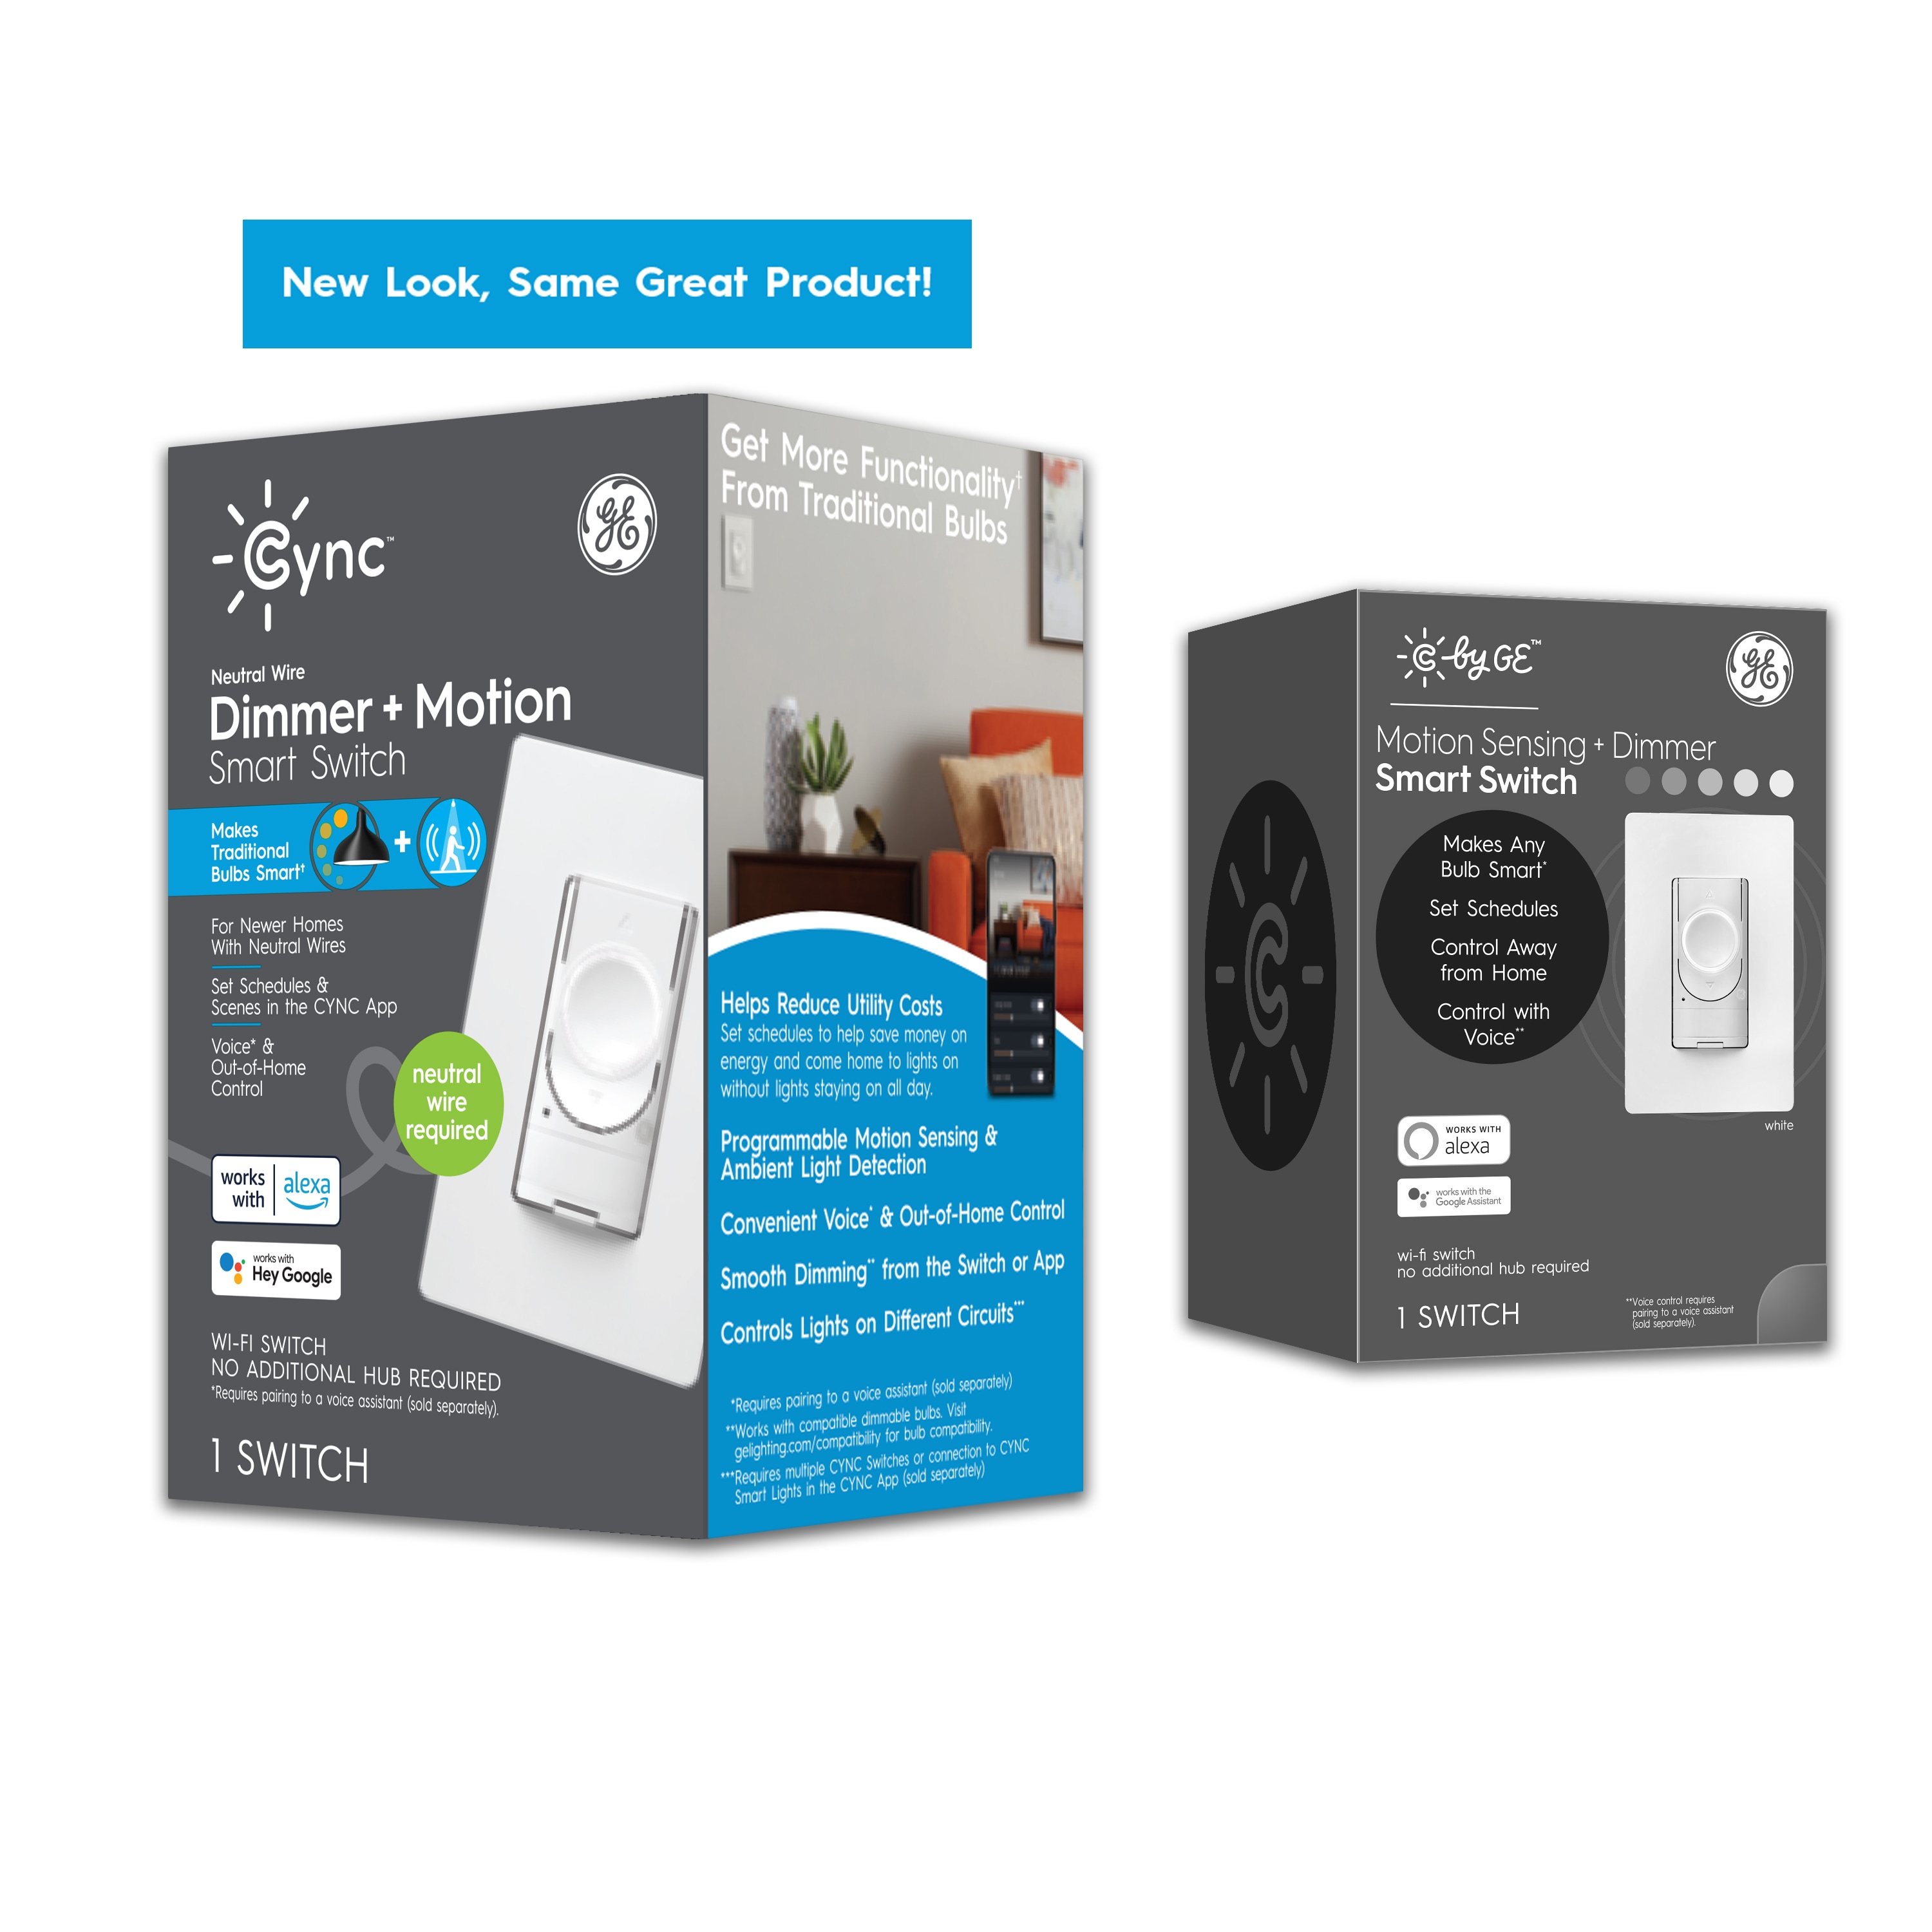 GE Wi-Fi Smart Switch 15-Amp 120/125-Volt Residential/Commercial